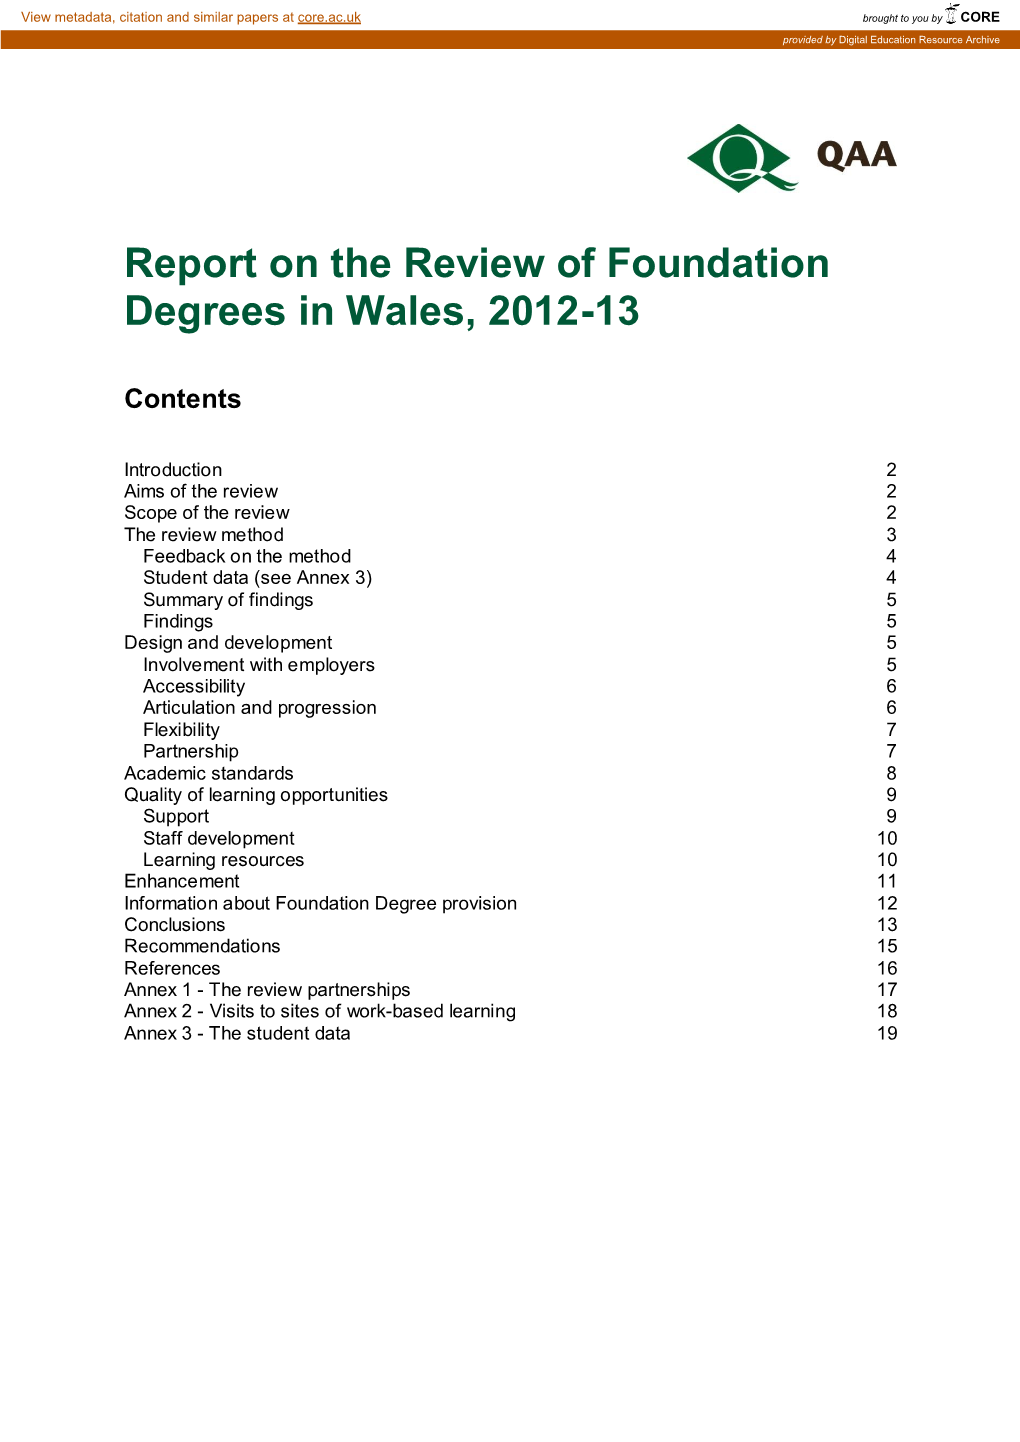 Report on the Review of Foundation Degrees in Wales, 2012-13